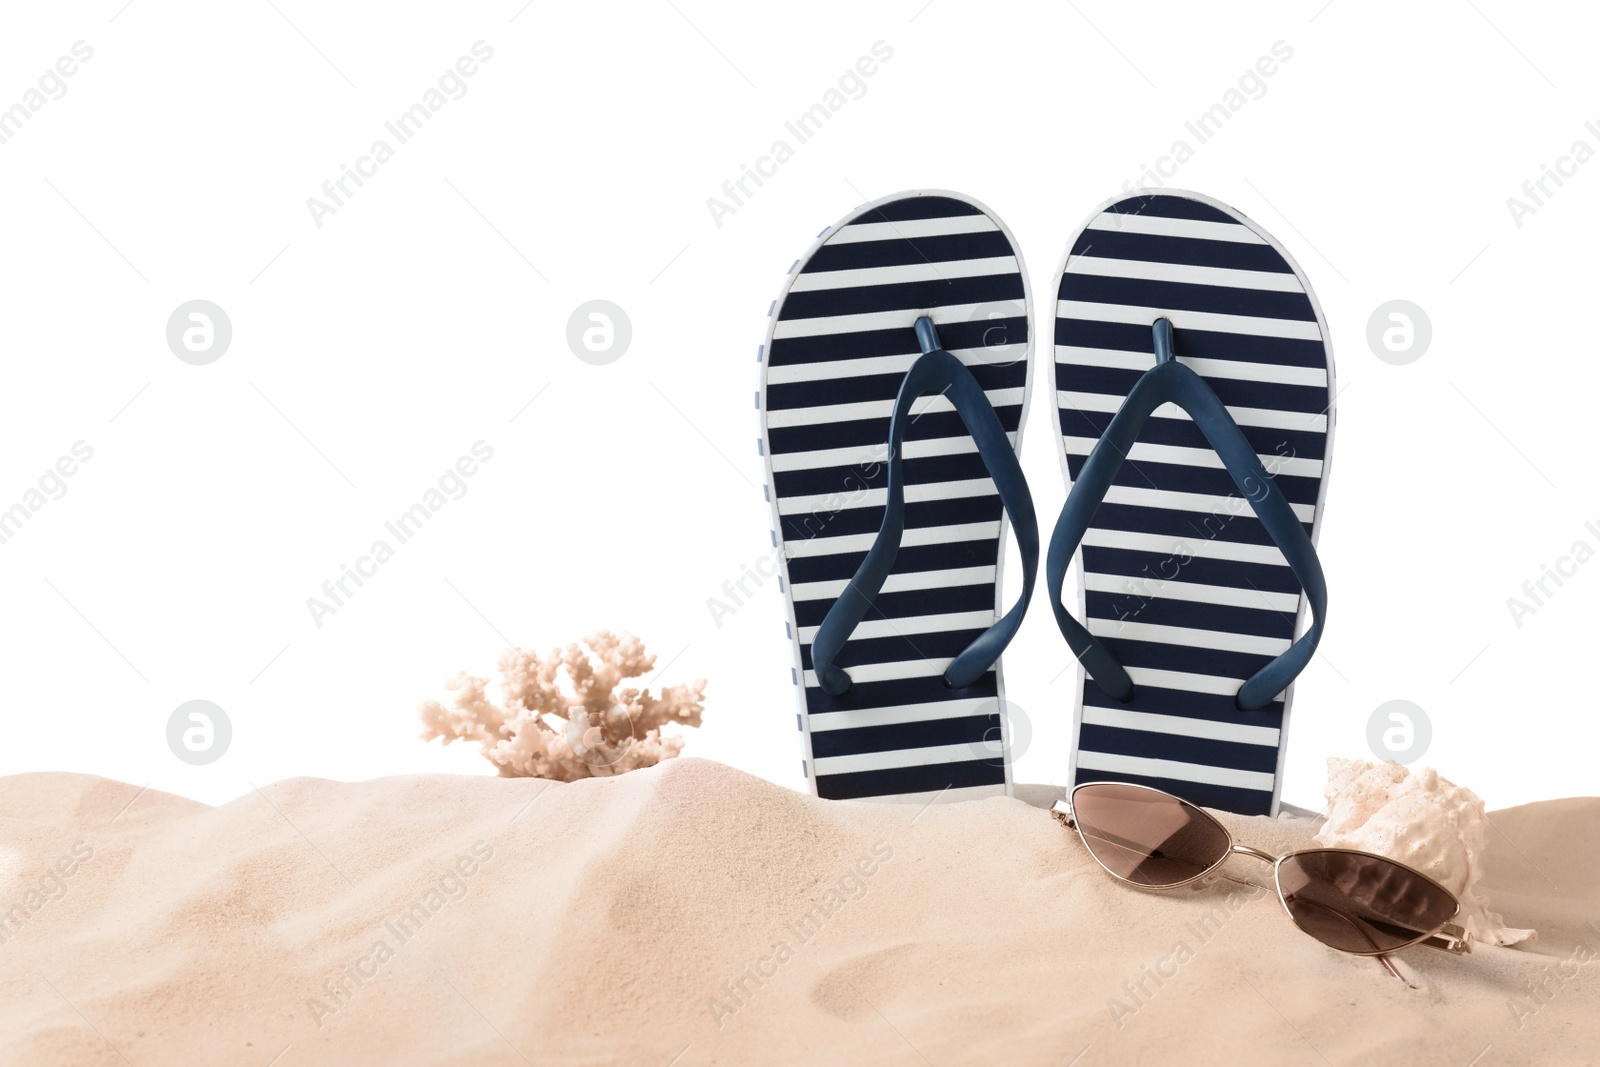 Photo of Striped flip flops, coral, sea shell and sunglasses on sand against white background